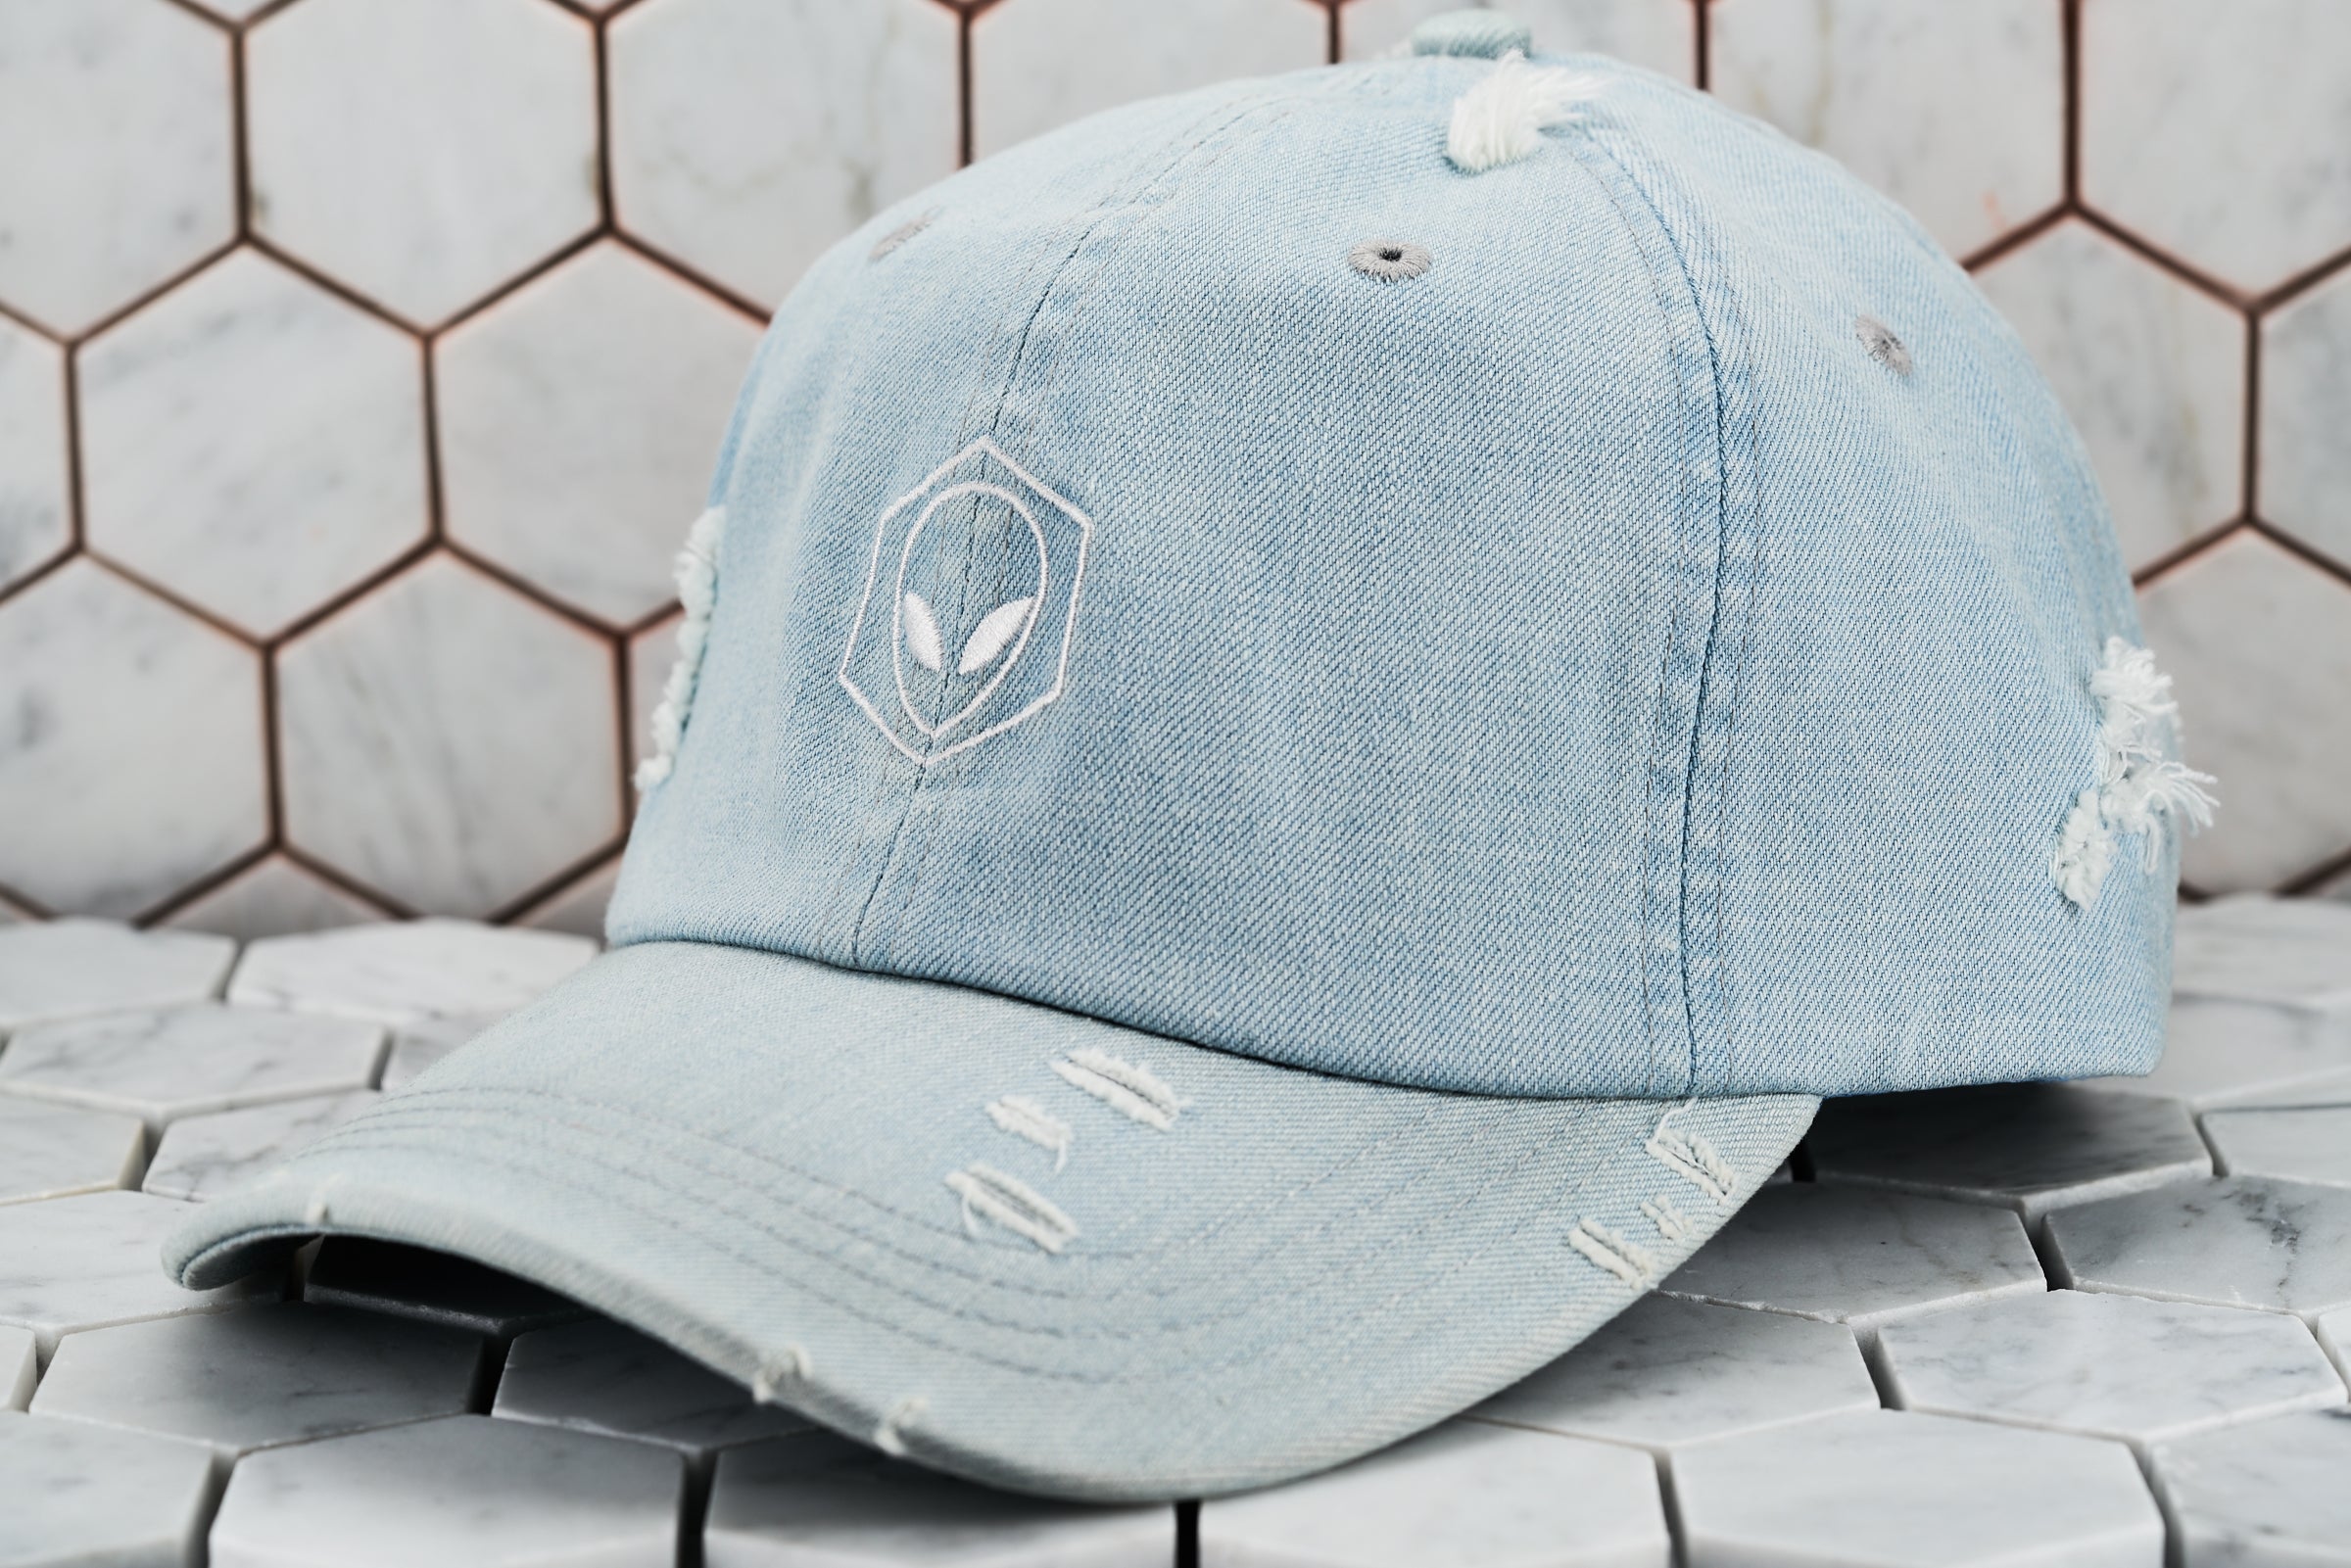 The front view of the distressed denim blue Dear Martian hat, which has a white embroidered hexagon logo.